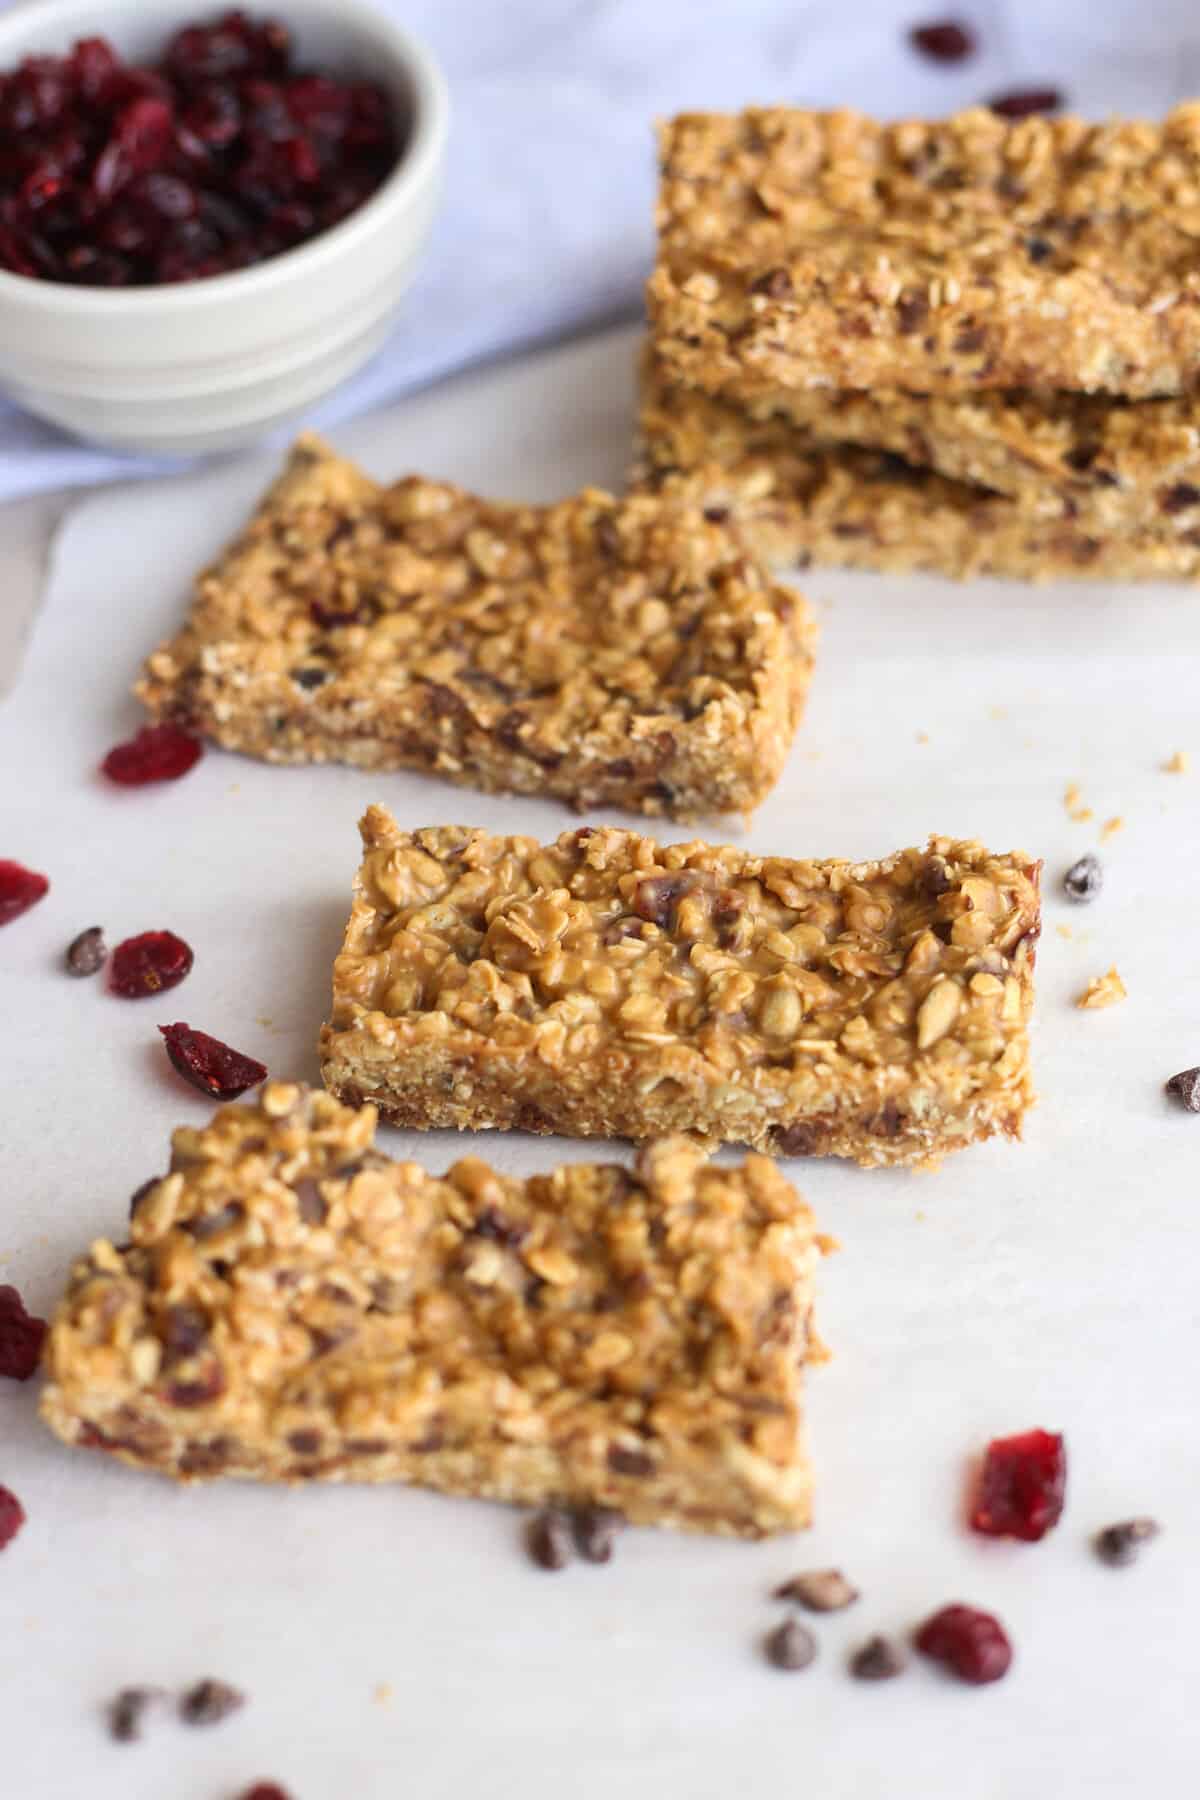 Homemade peanut butter protein bars laid out on parchment paper.